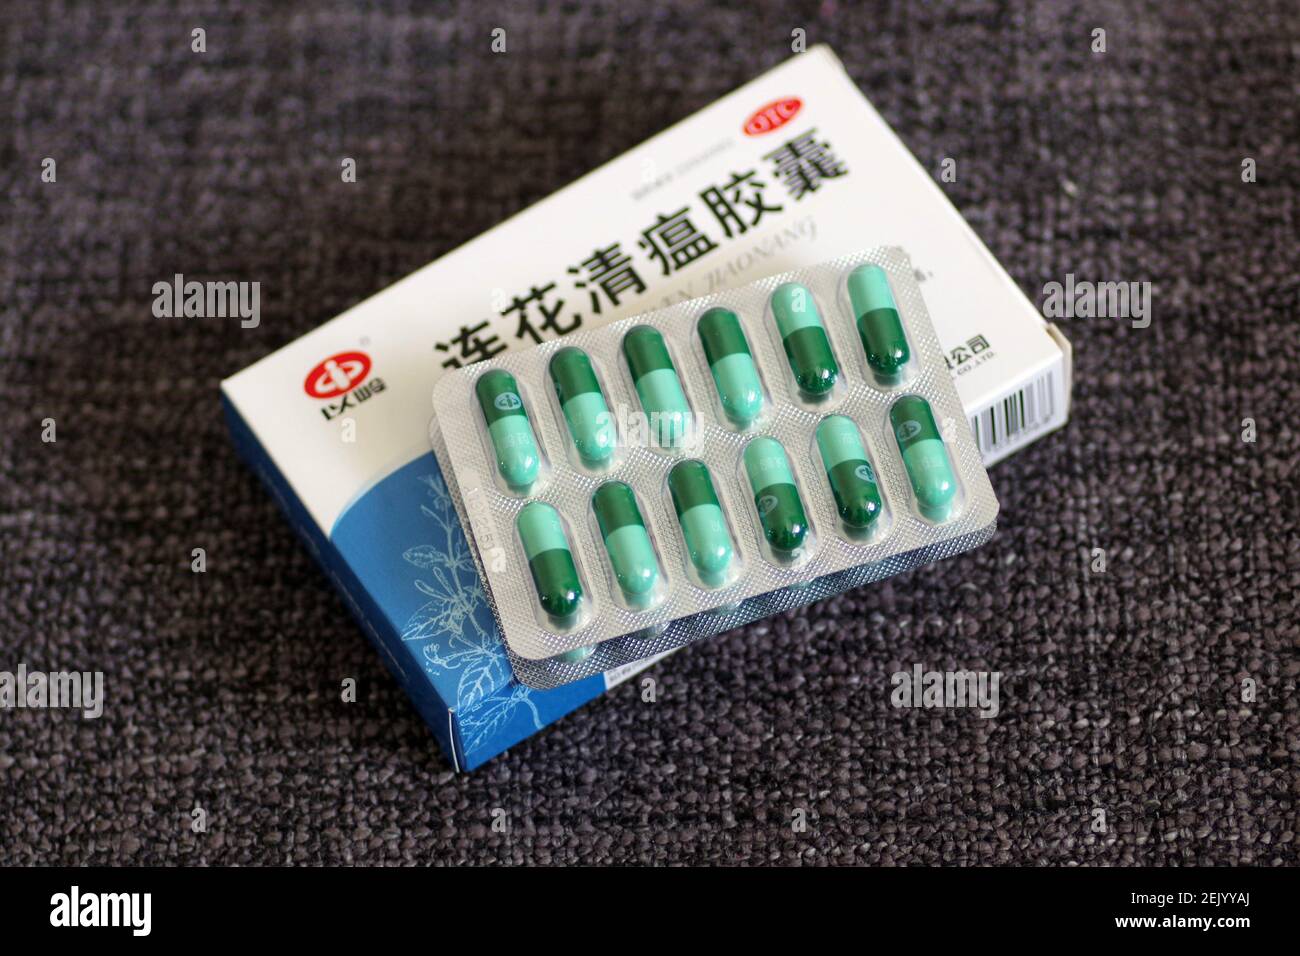 3 Mistakes In chineses medicine That Make You Look Dumb